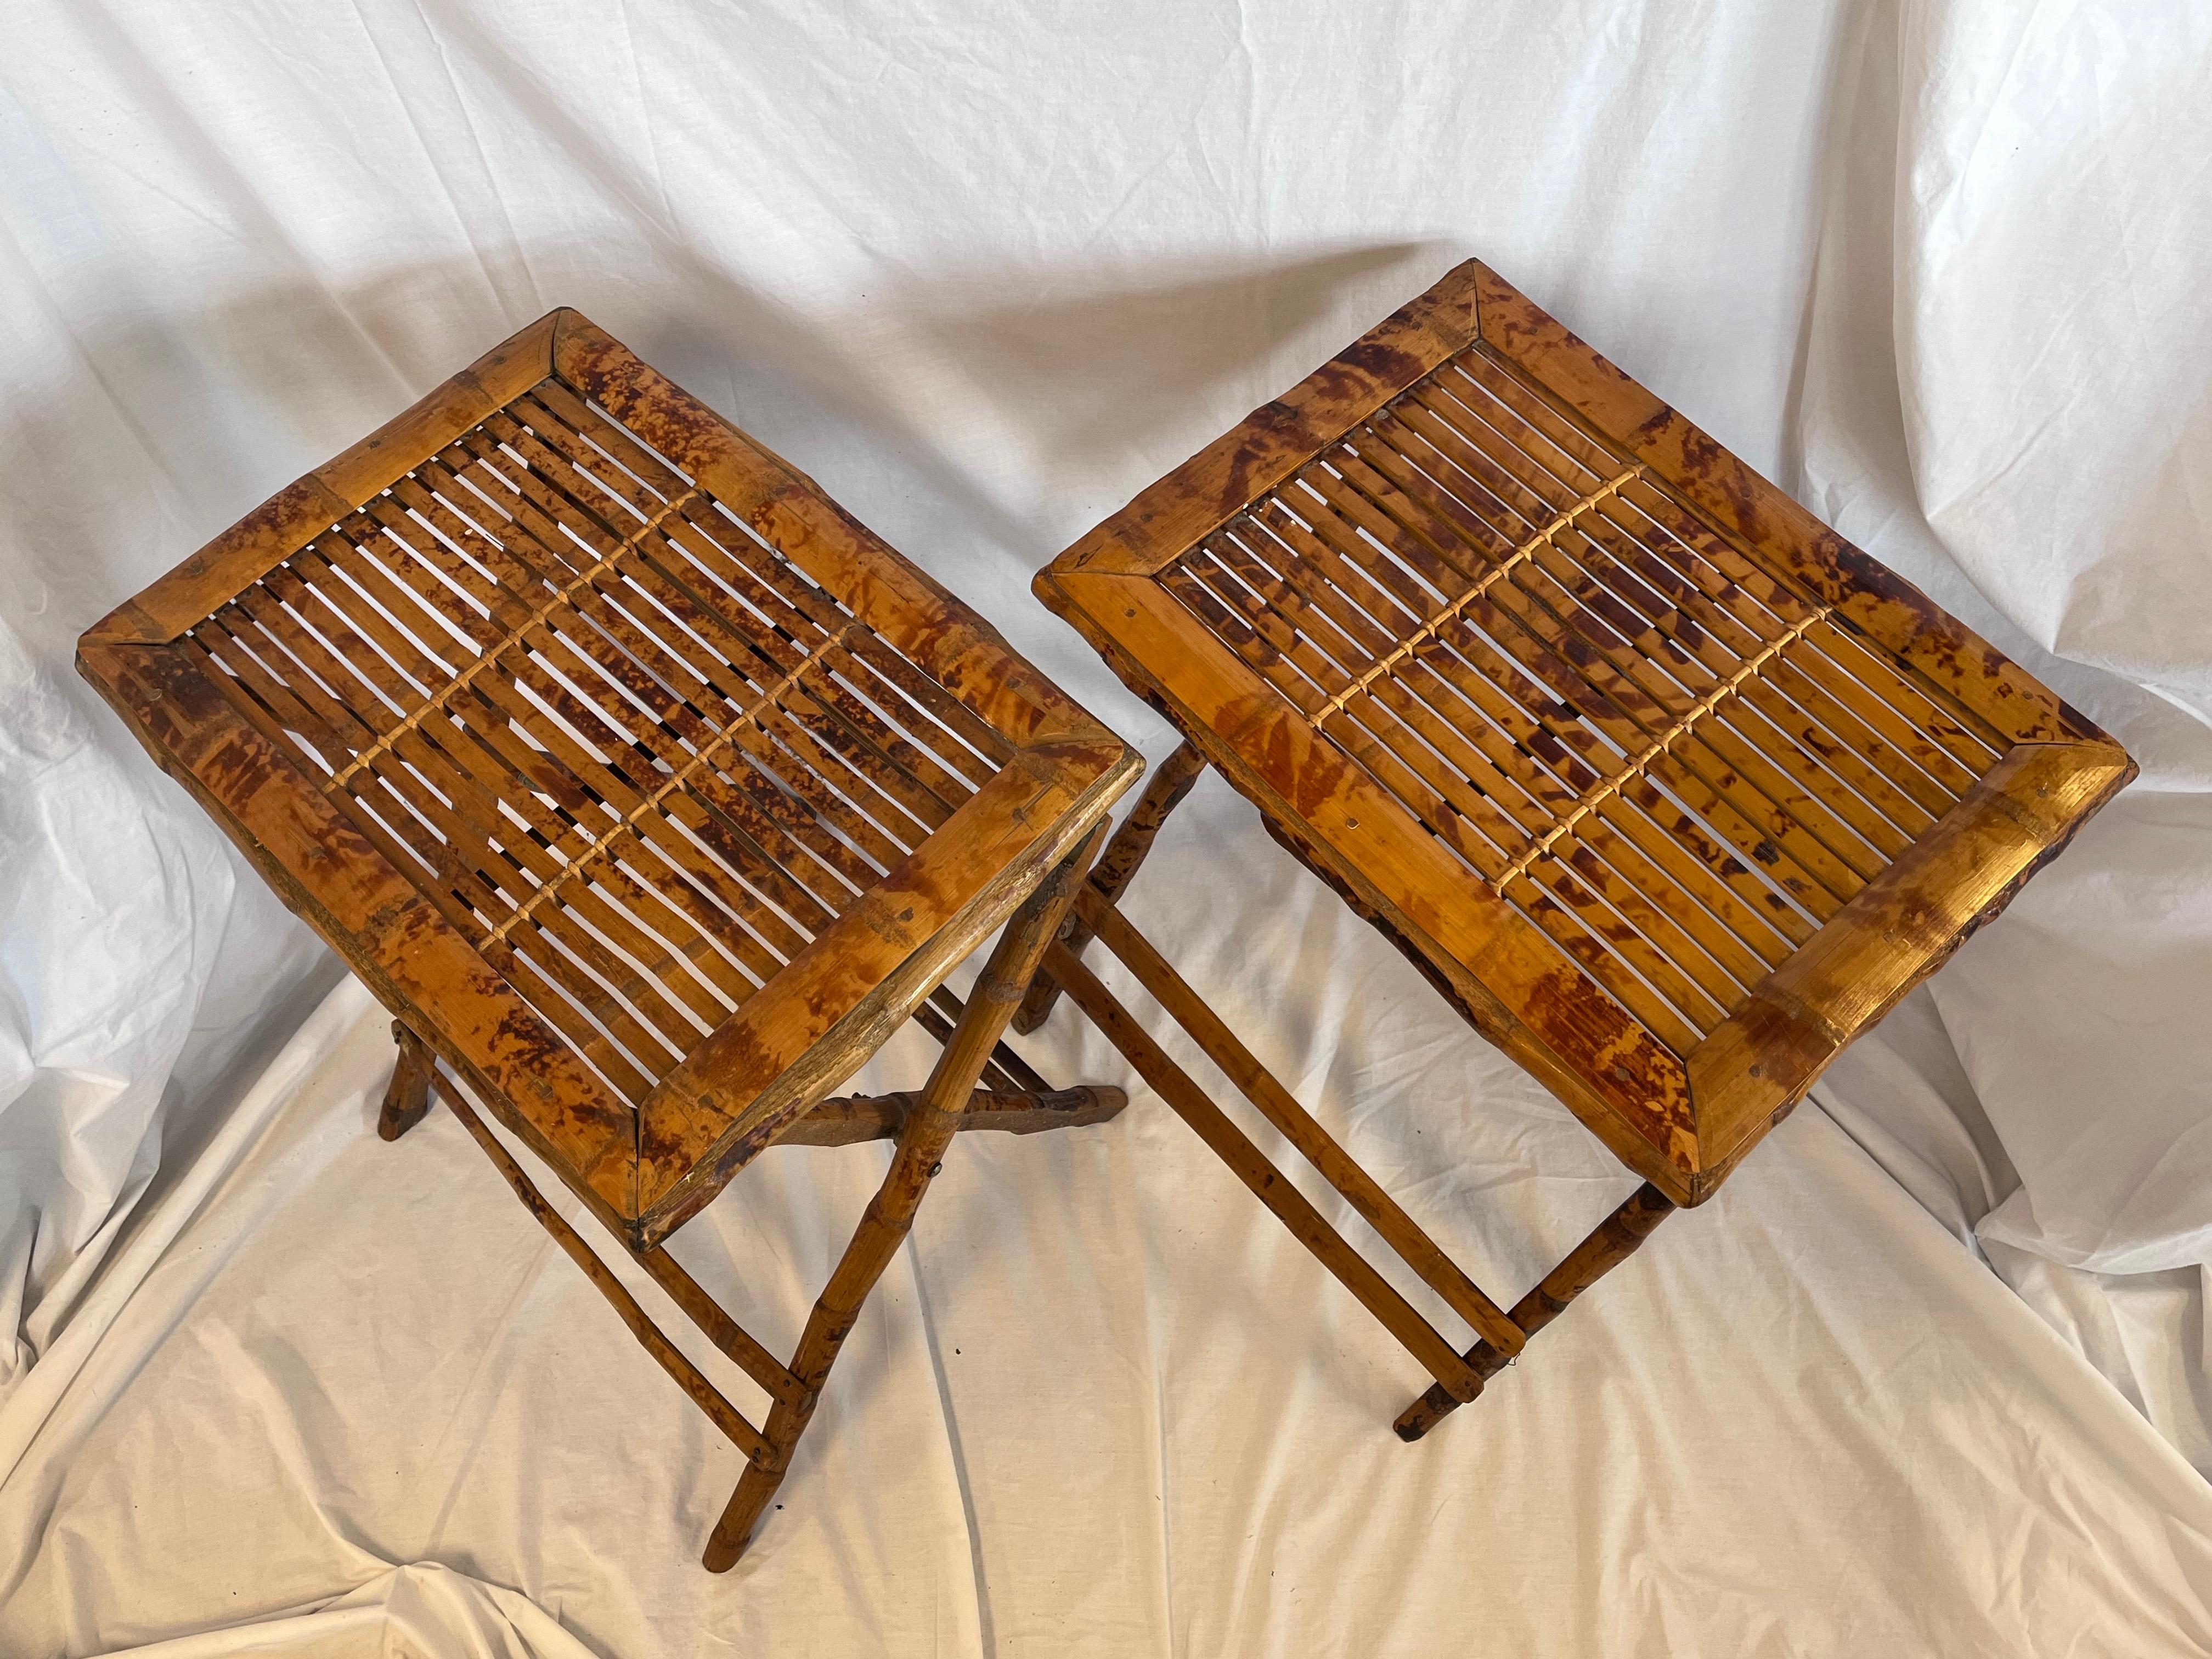 A pair of circa 1940's tortoise bamboo folding tray tables. This pair of mid century tables could also be used as end or side tables as well as nightstands. The tortoise pattern on the bamboo is truly beautiful and adds a very special flair to the